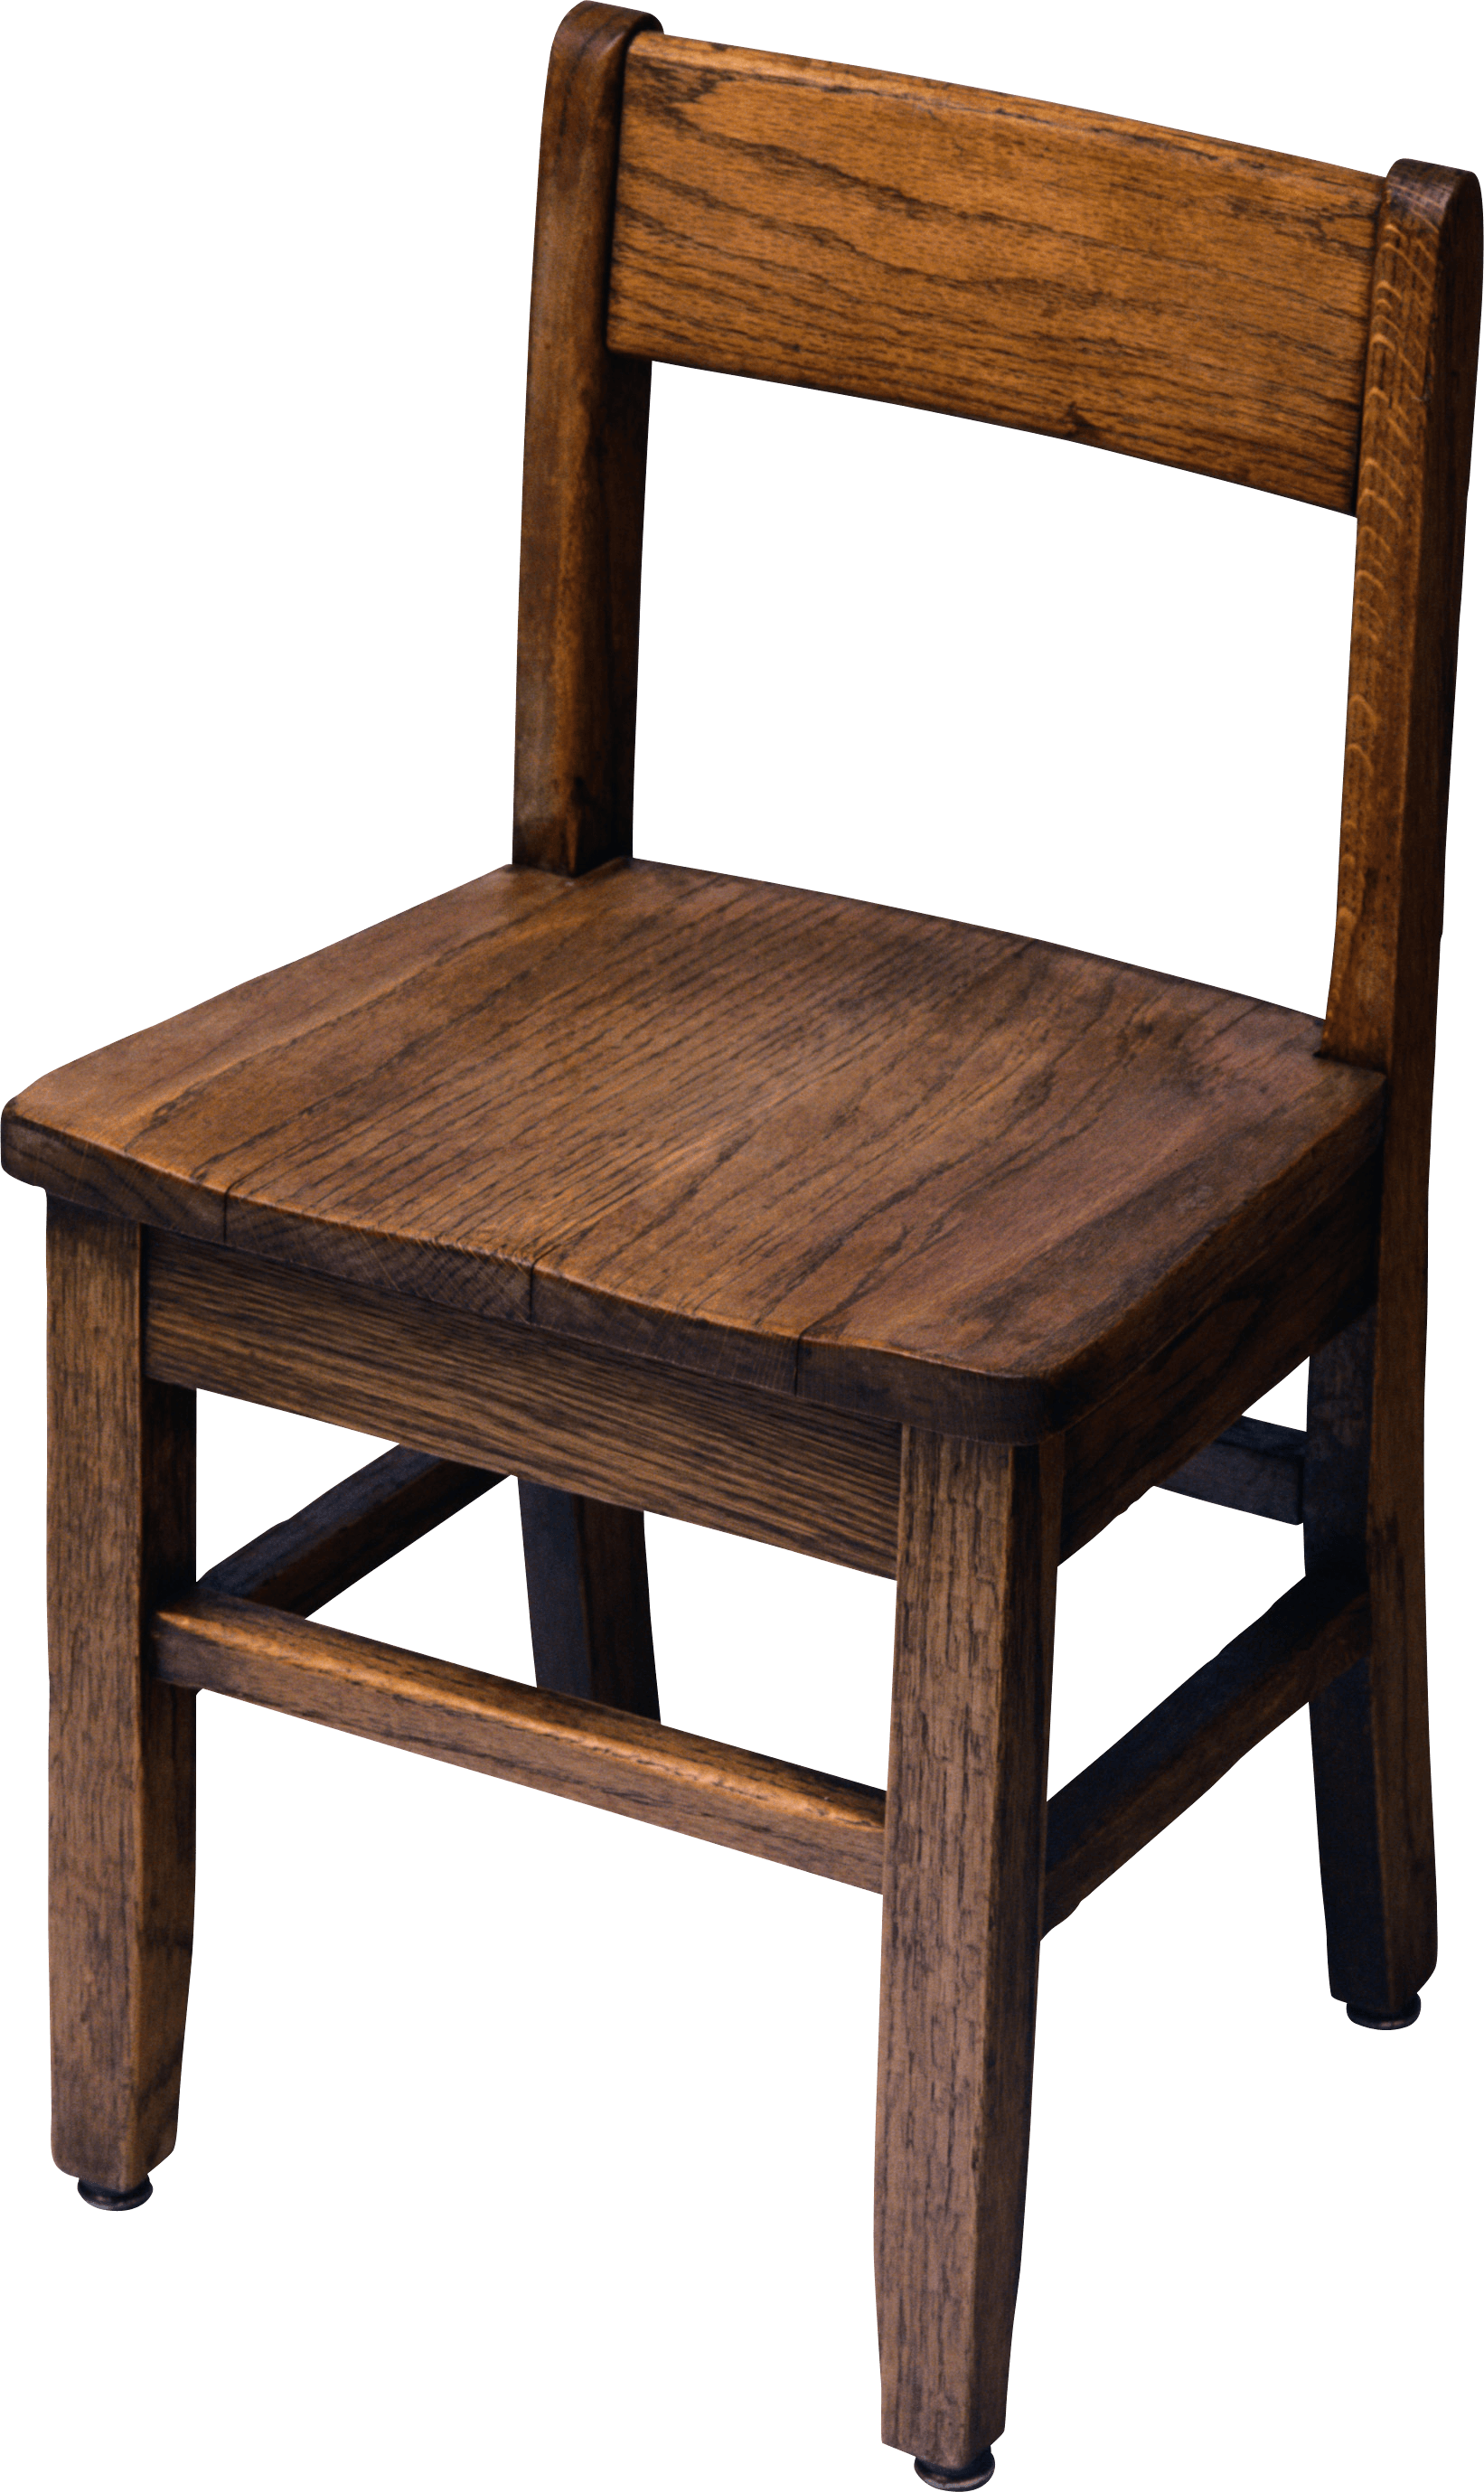 Wooden Antique Chair PNG Image High Quality PNG Image